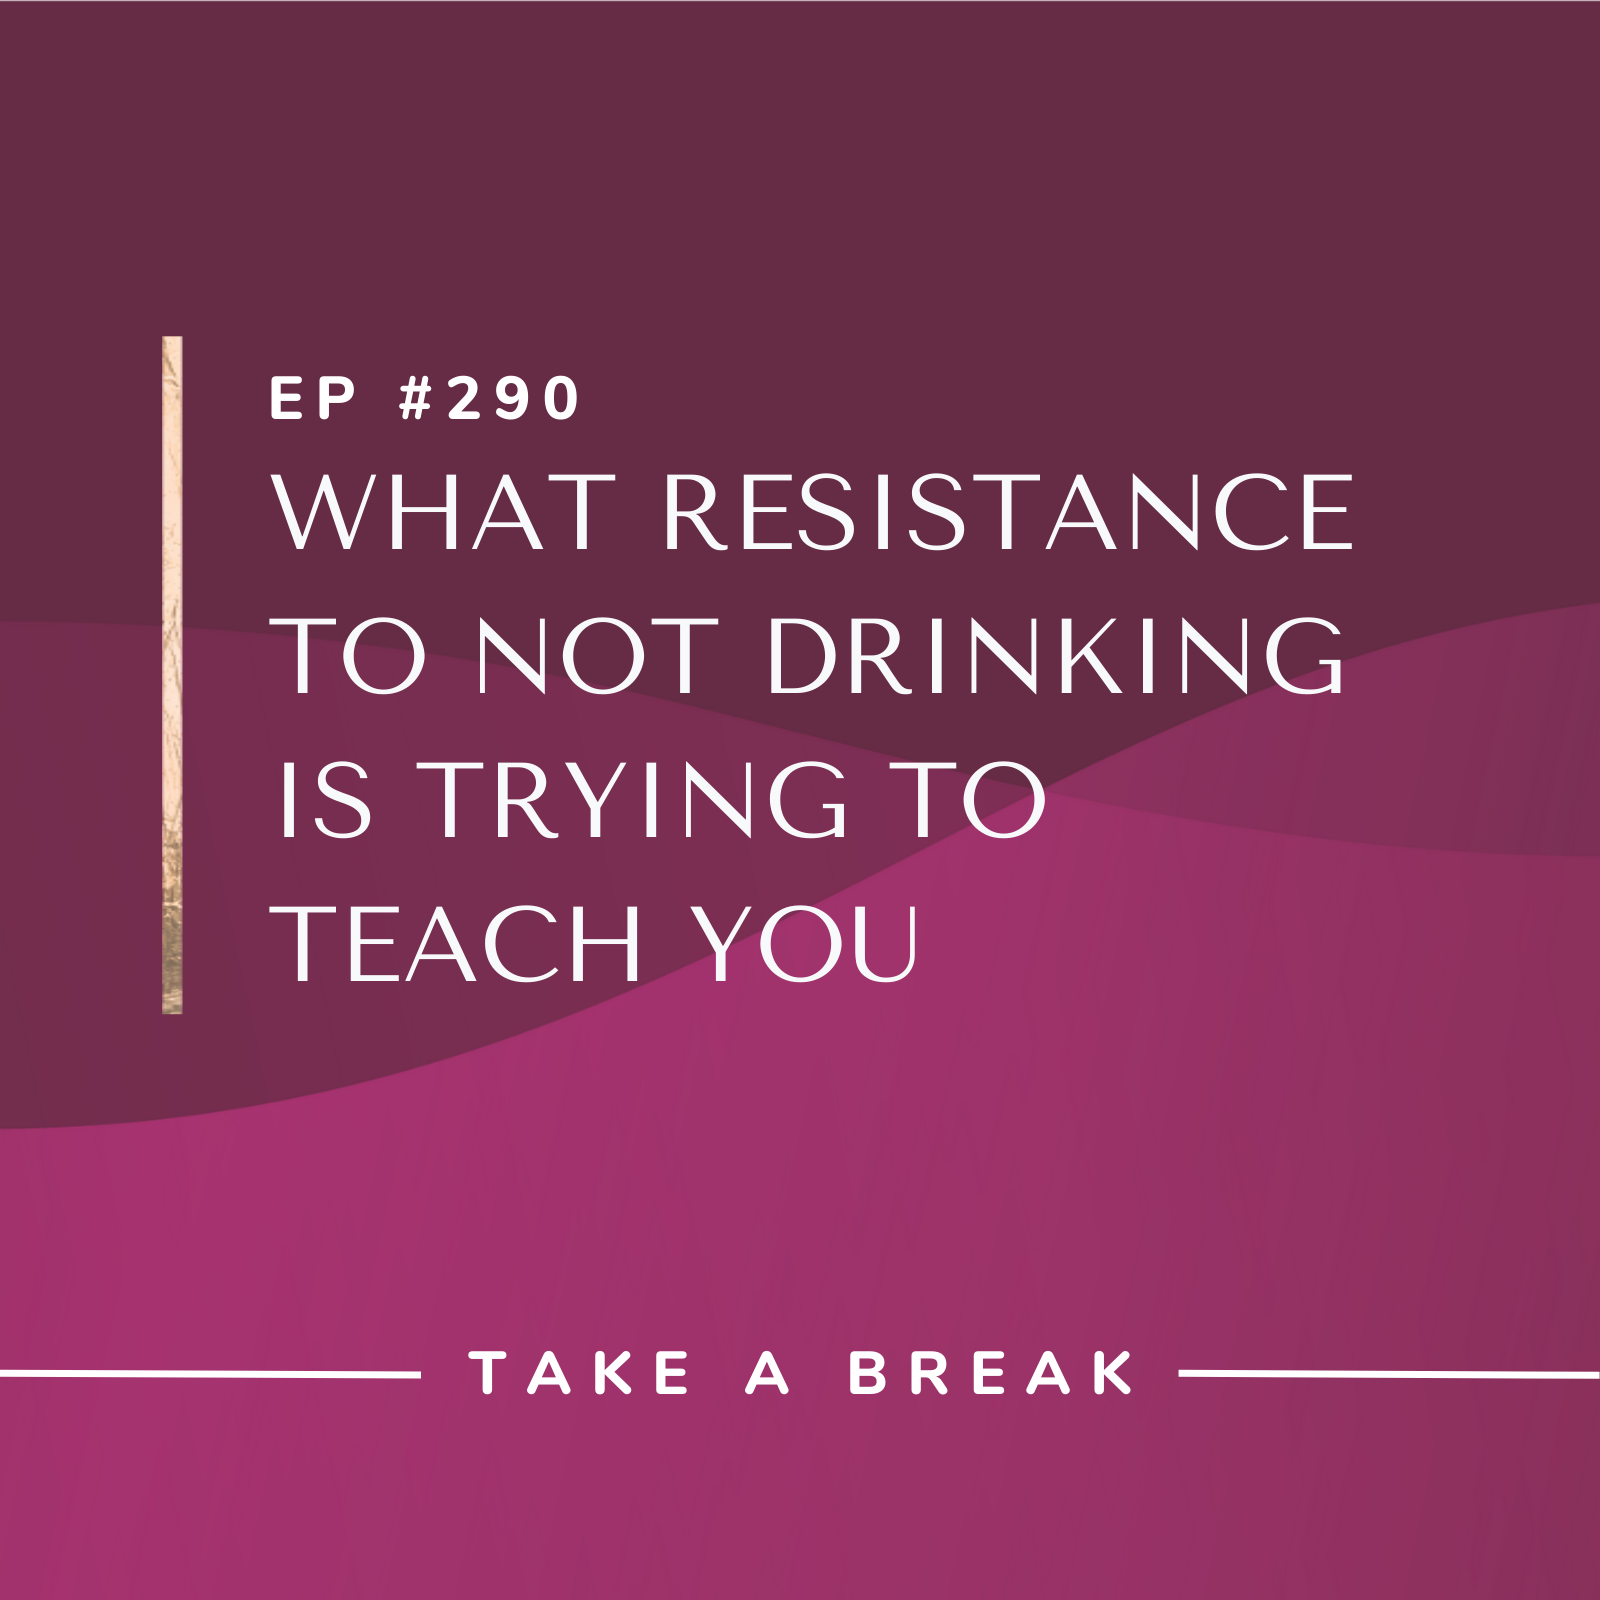 Take A Break from Drinking What Resistance to Not Drinking is Trying to Teach You